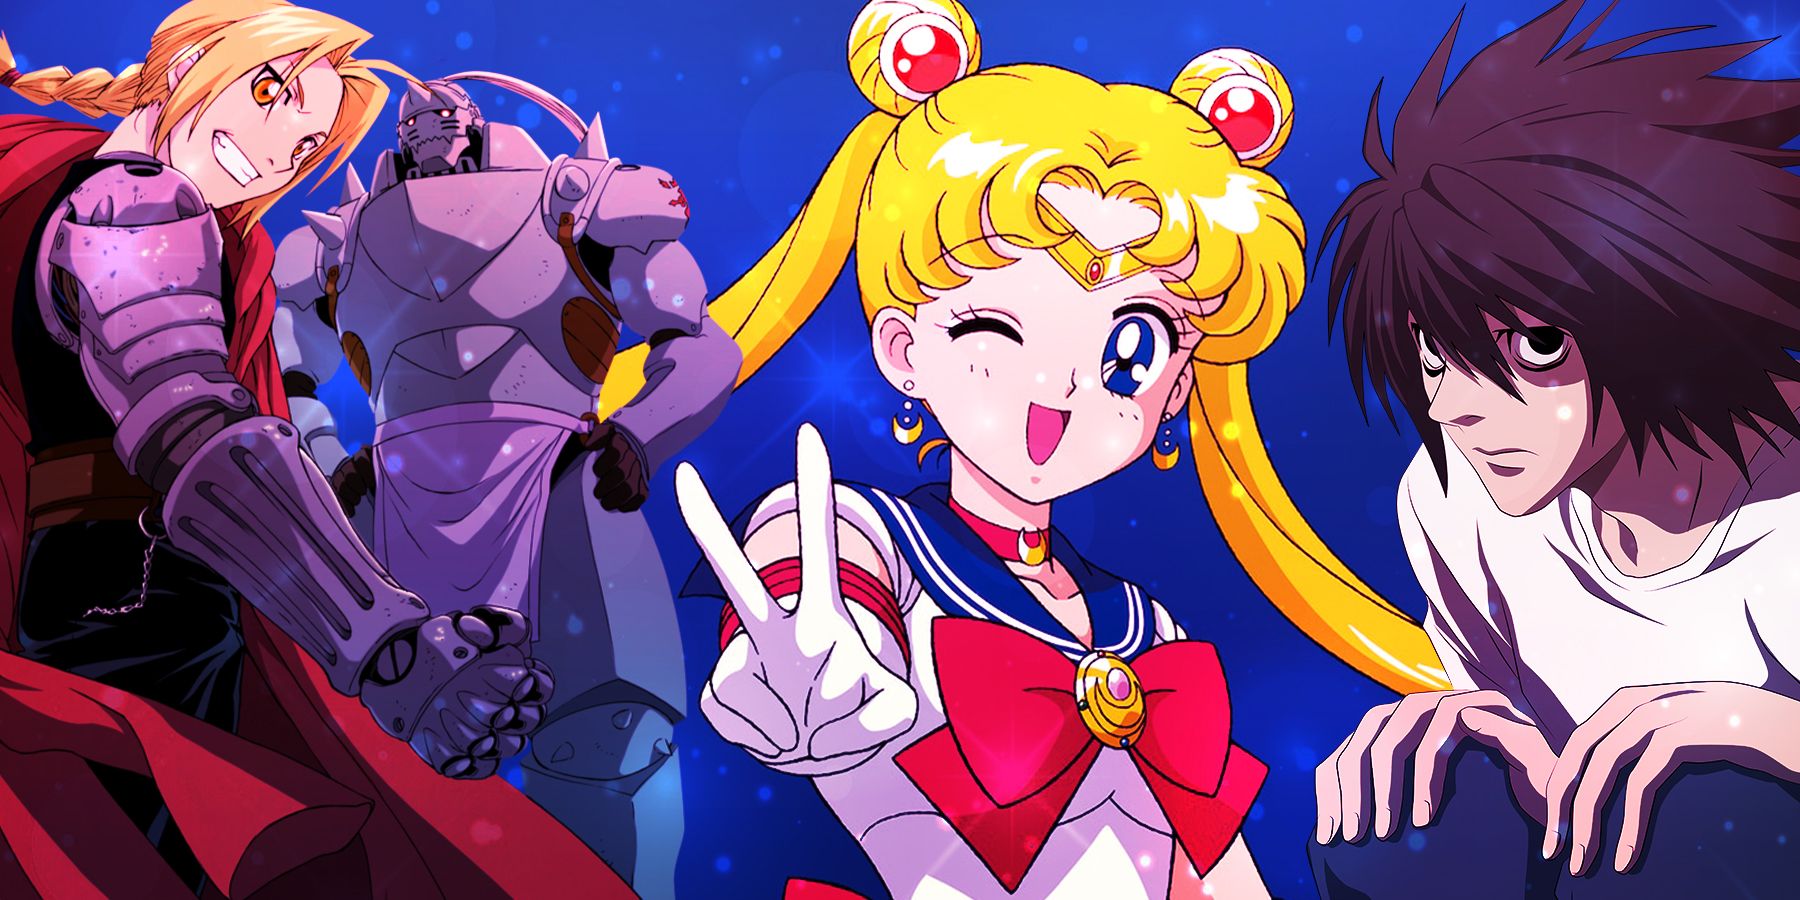 On the left, brothers Edward and Alphonse Eric look determined. In the middle, Sailor Moon winks and shows the peace sign. On the right, L crouches and frowns. 